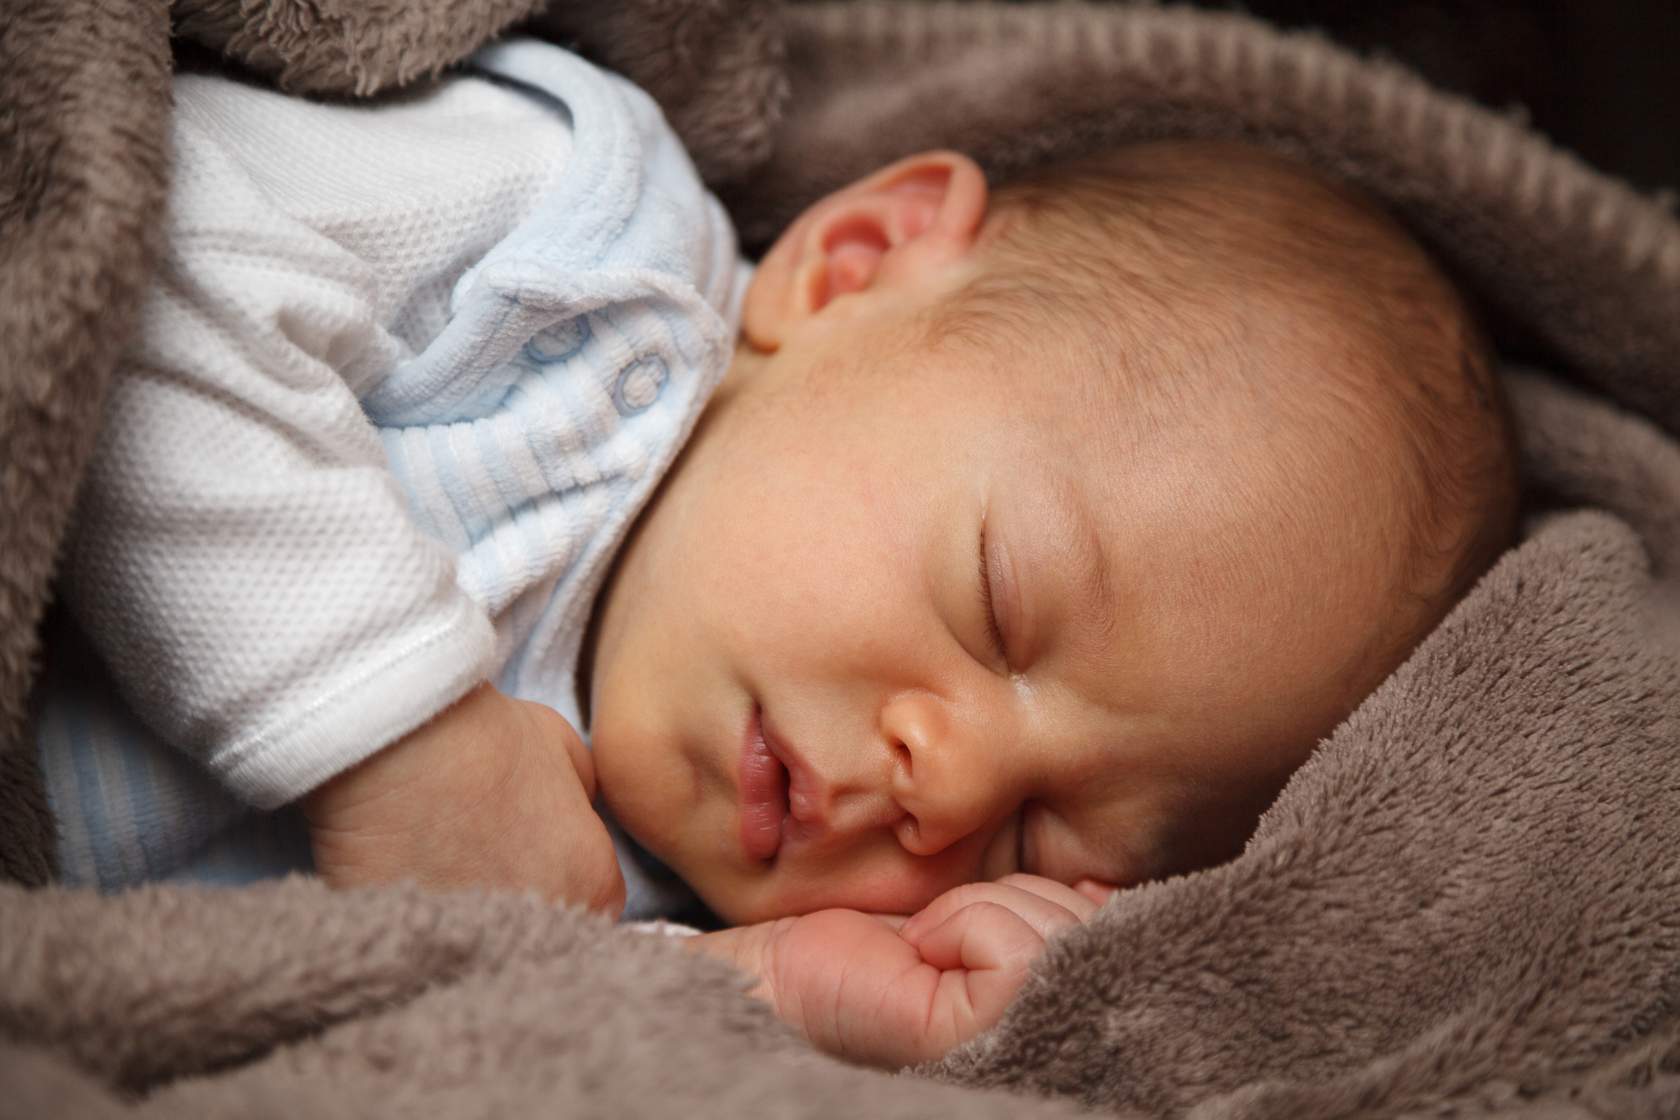 A baby sleeping in a blanket, demonstrating sample psychological functions.